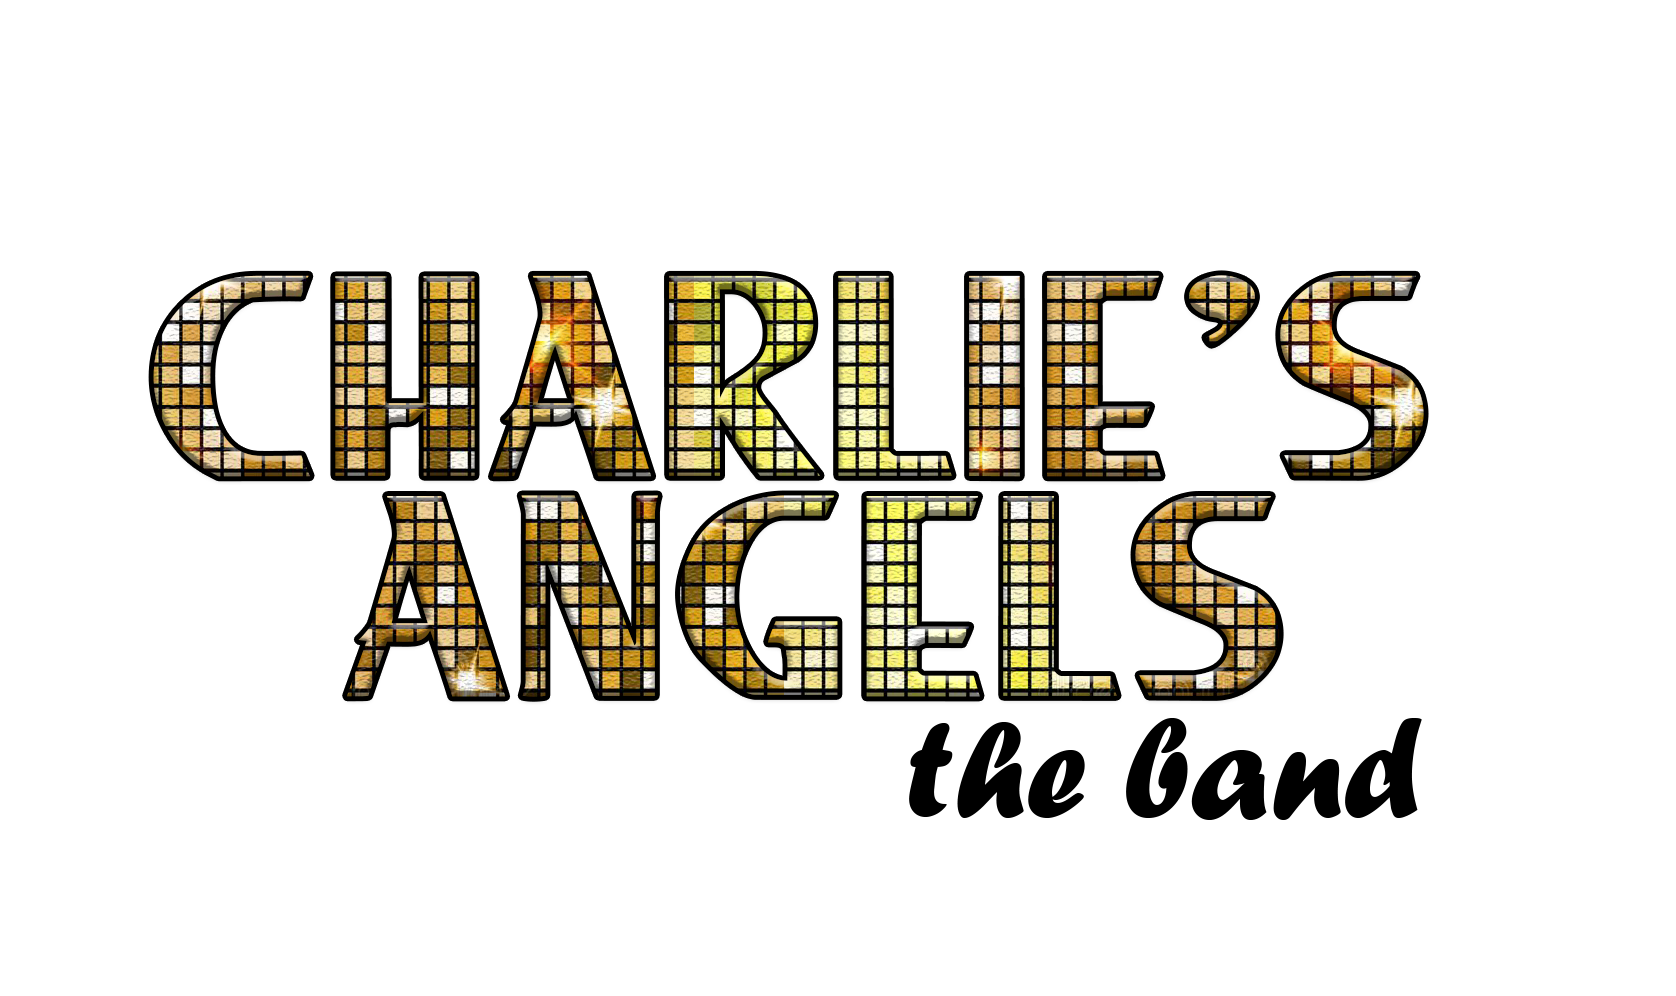 CHARLIE'S ANGELS - The Band